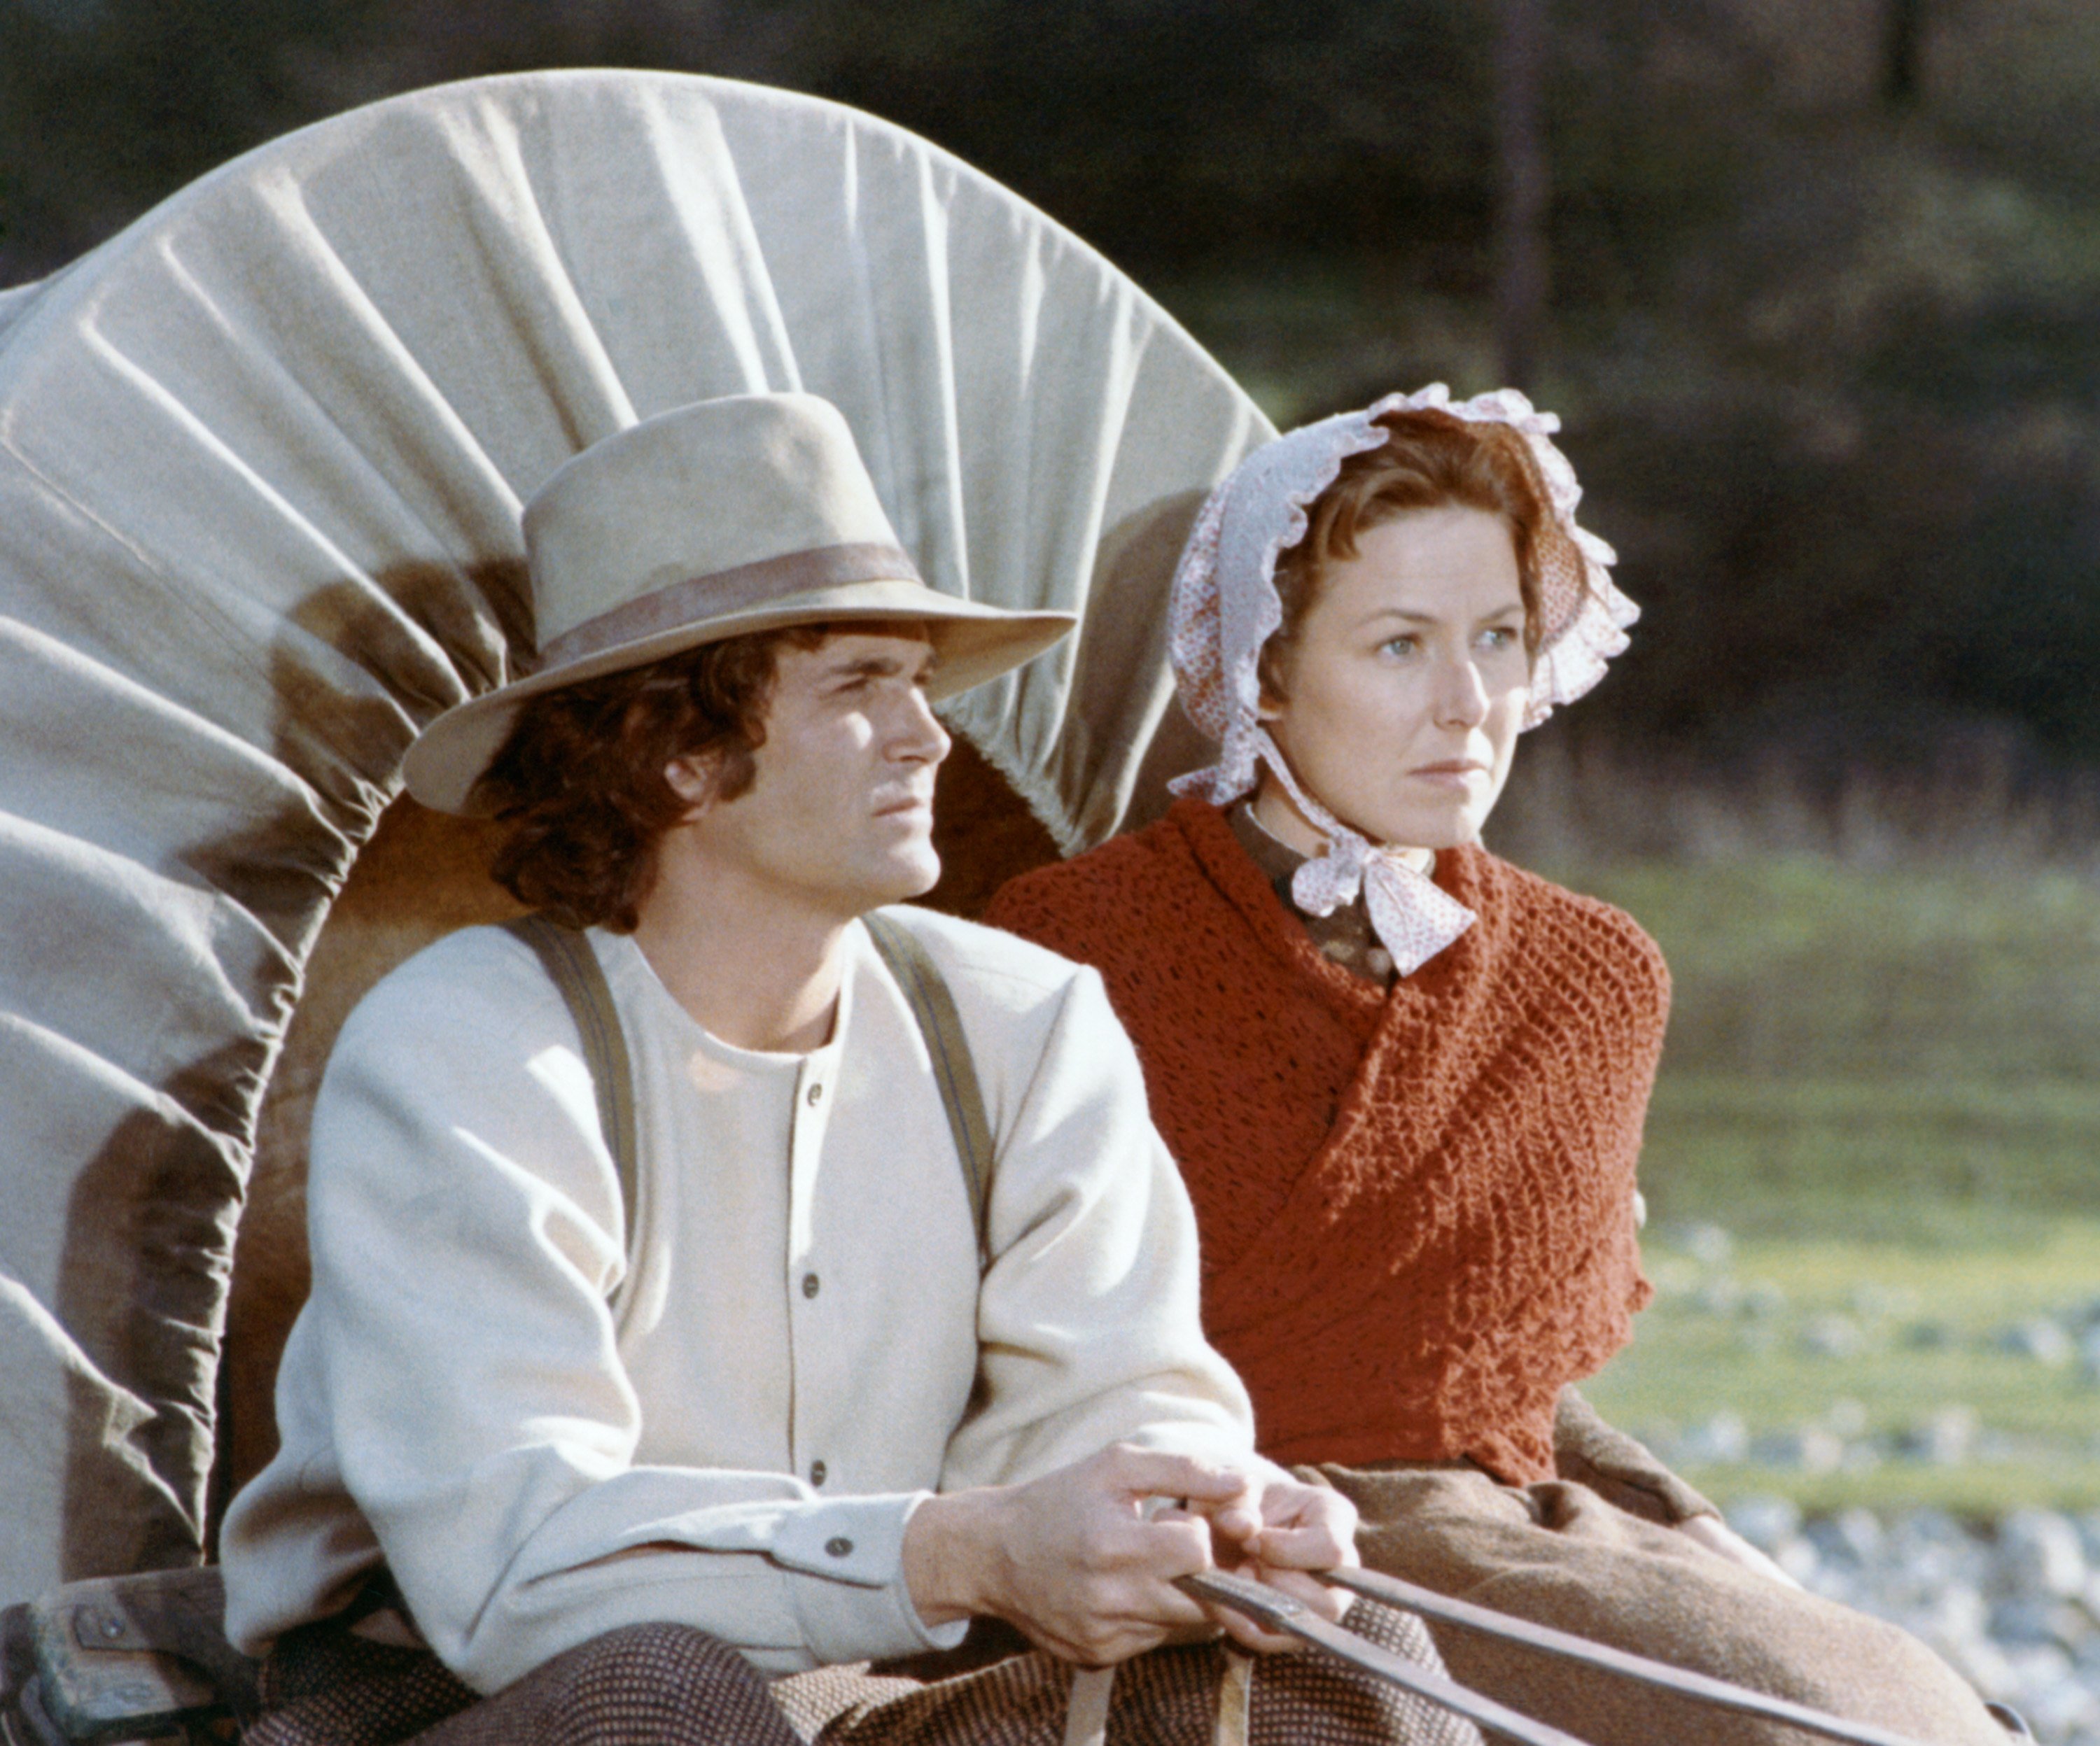 Michael Landon and Karen Grassle in a covered wagon